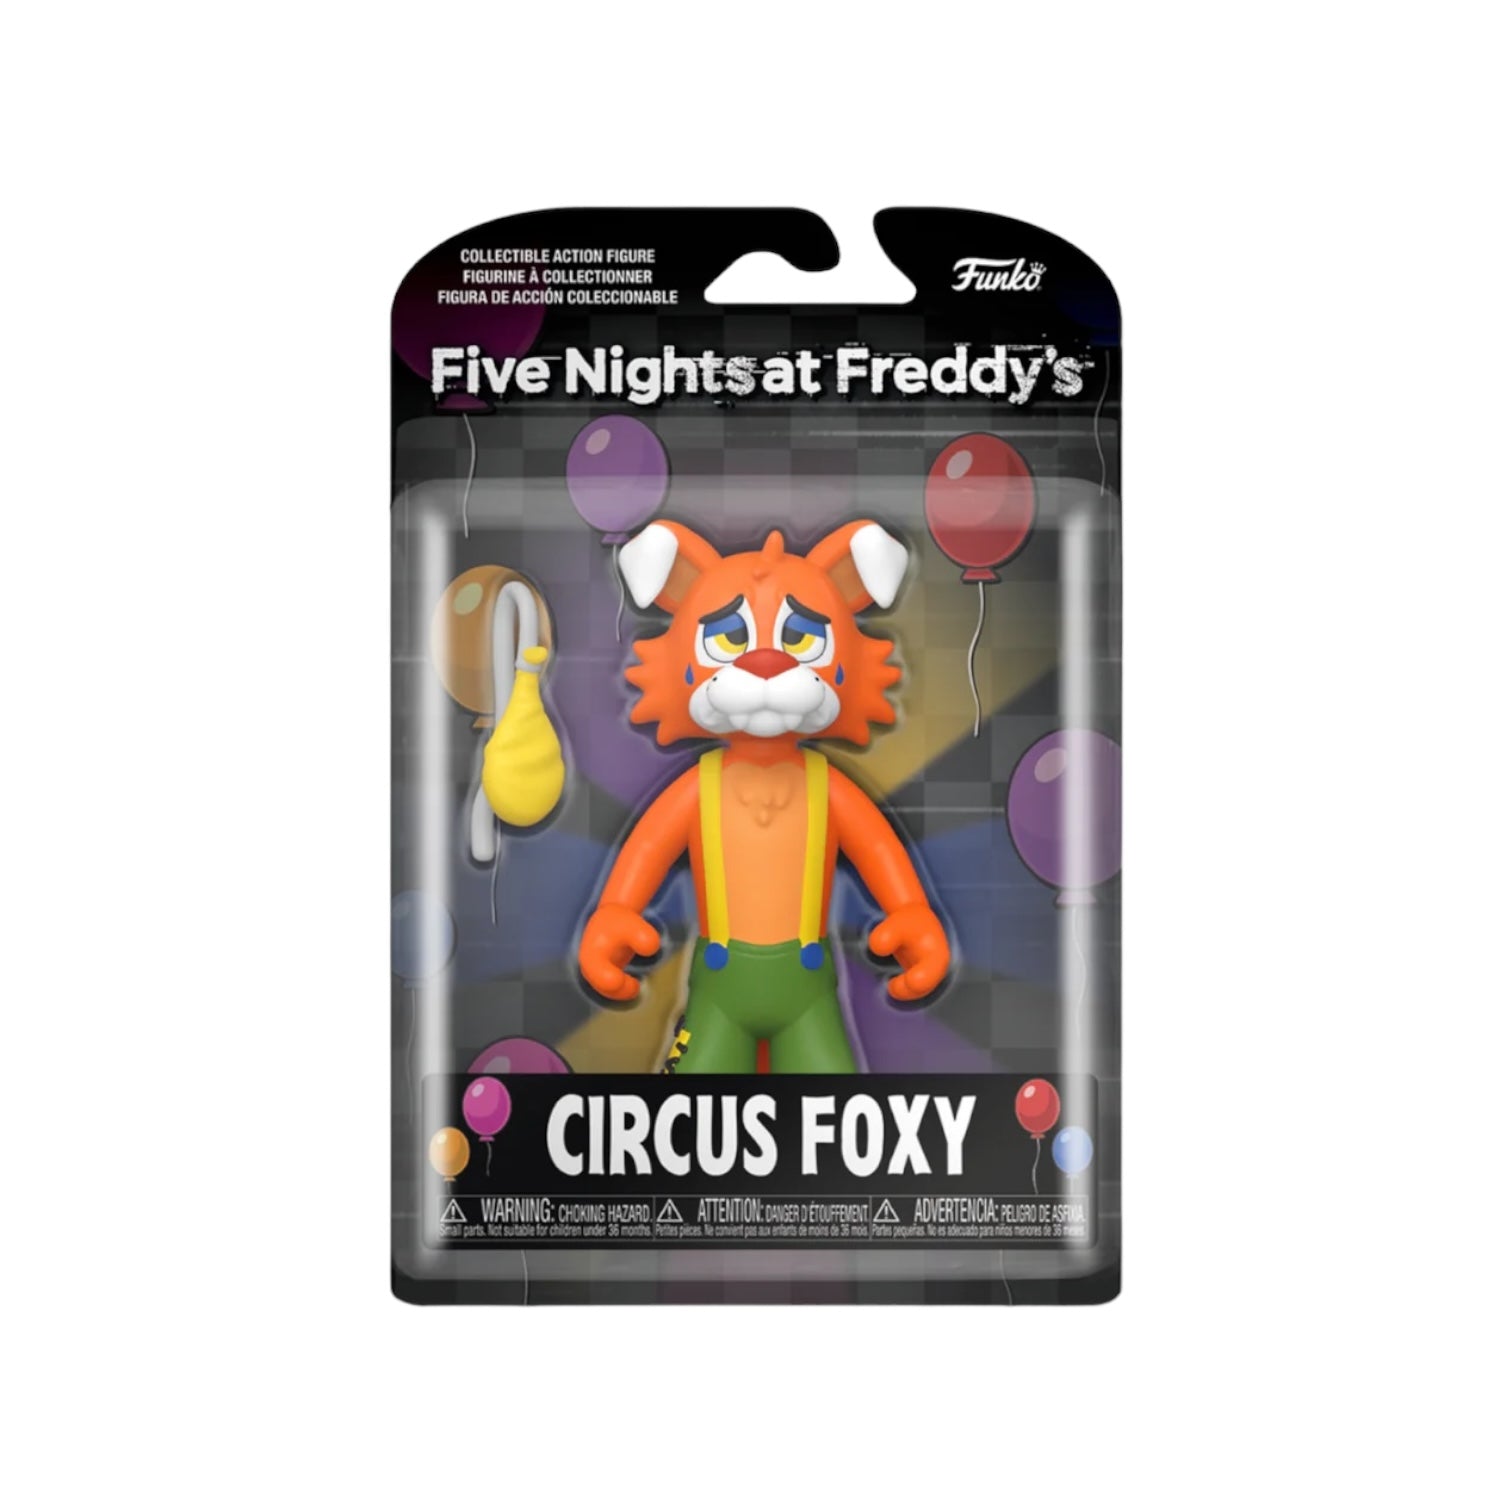 Circus Foxy Funko Action Figure Five Nights at Freddy’s - Special Edition